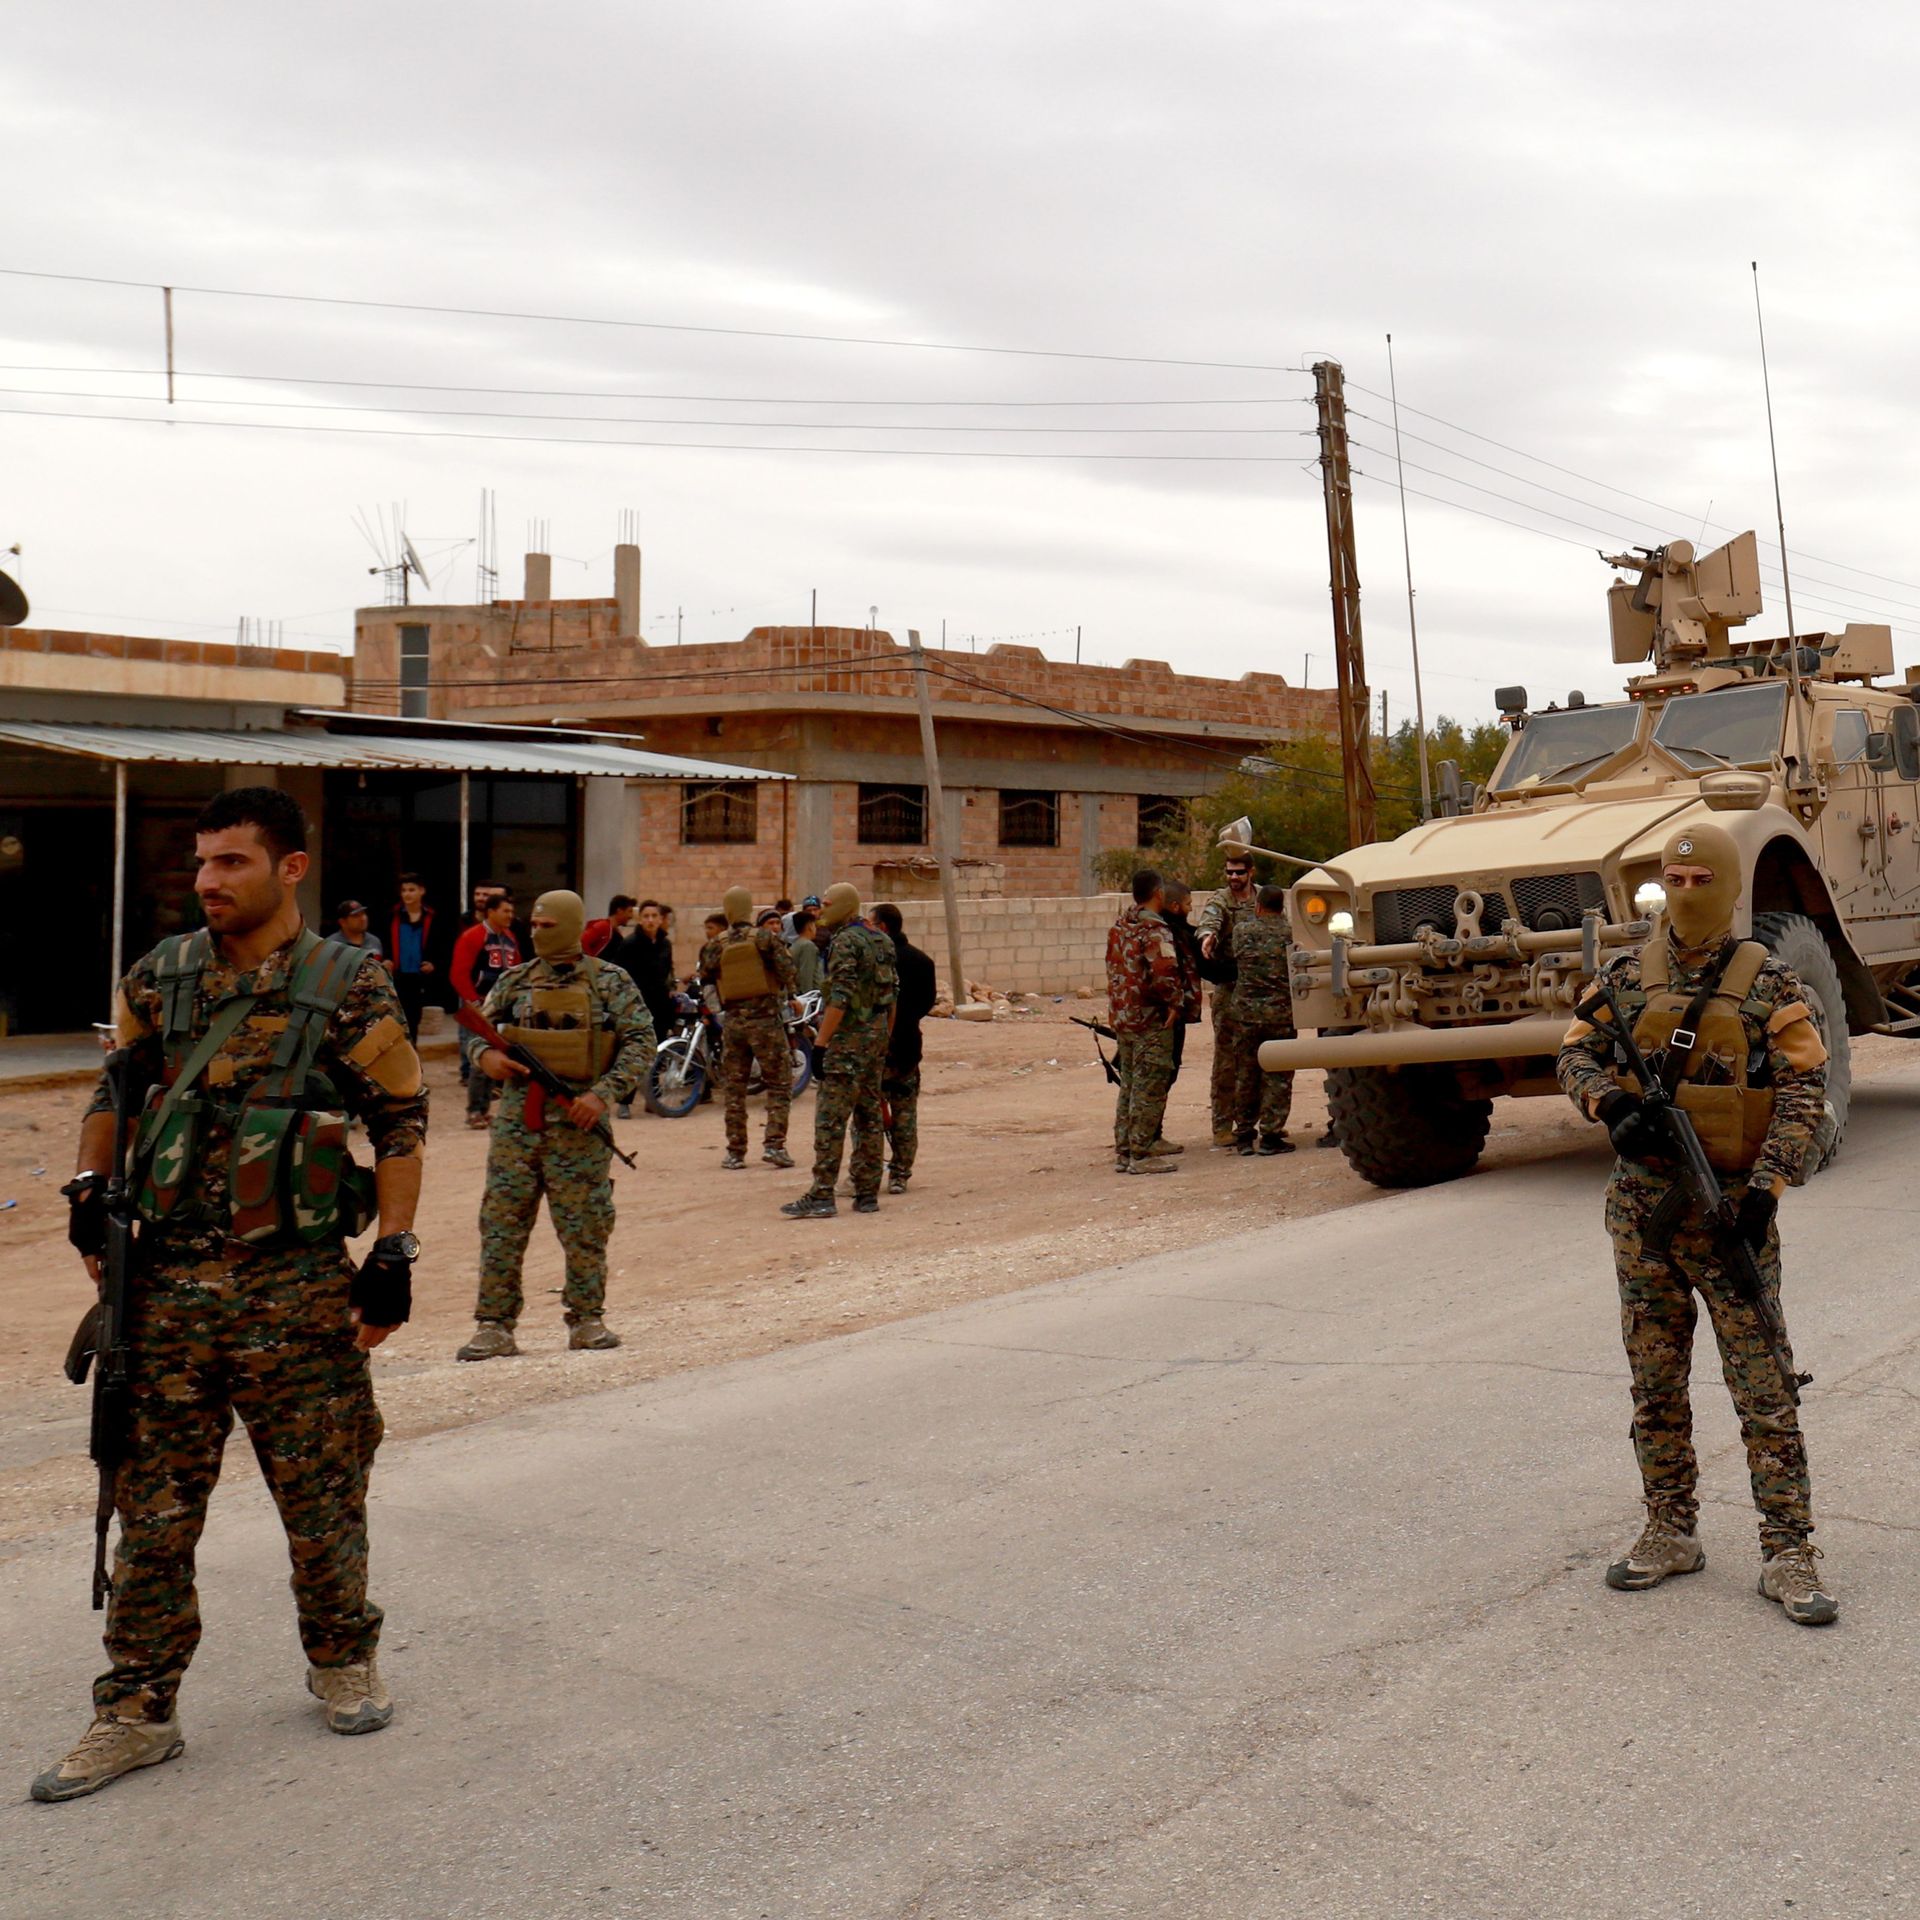 soldiers on foot patrolling a town, with tanks in the background